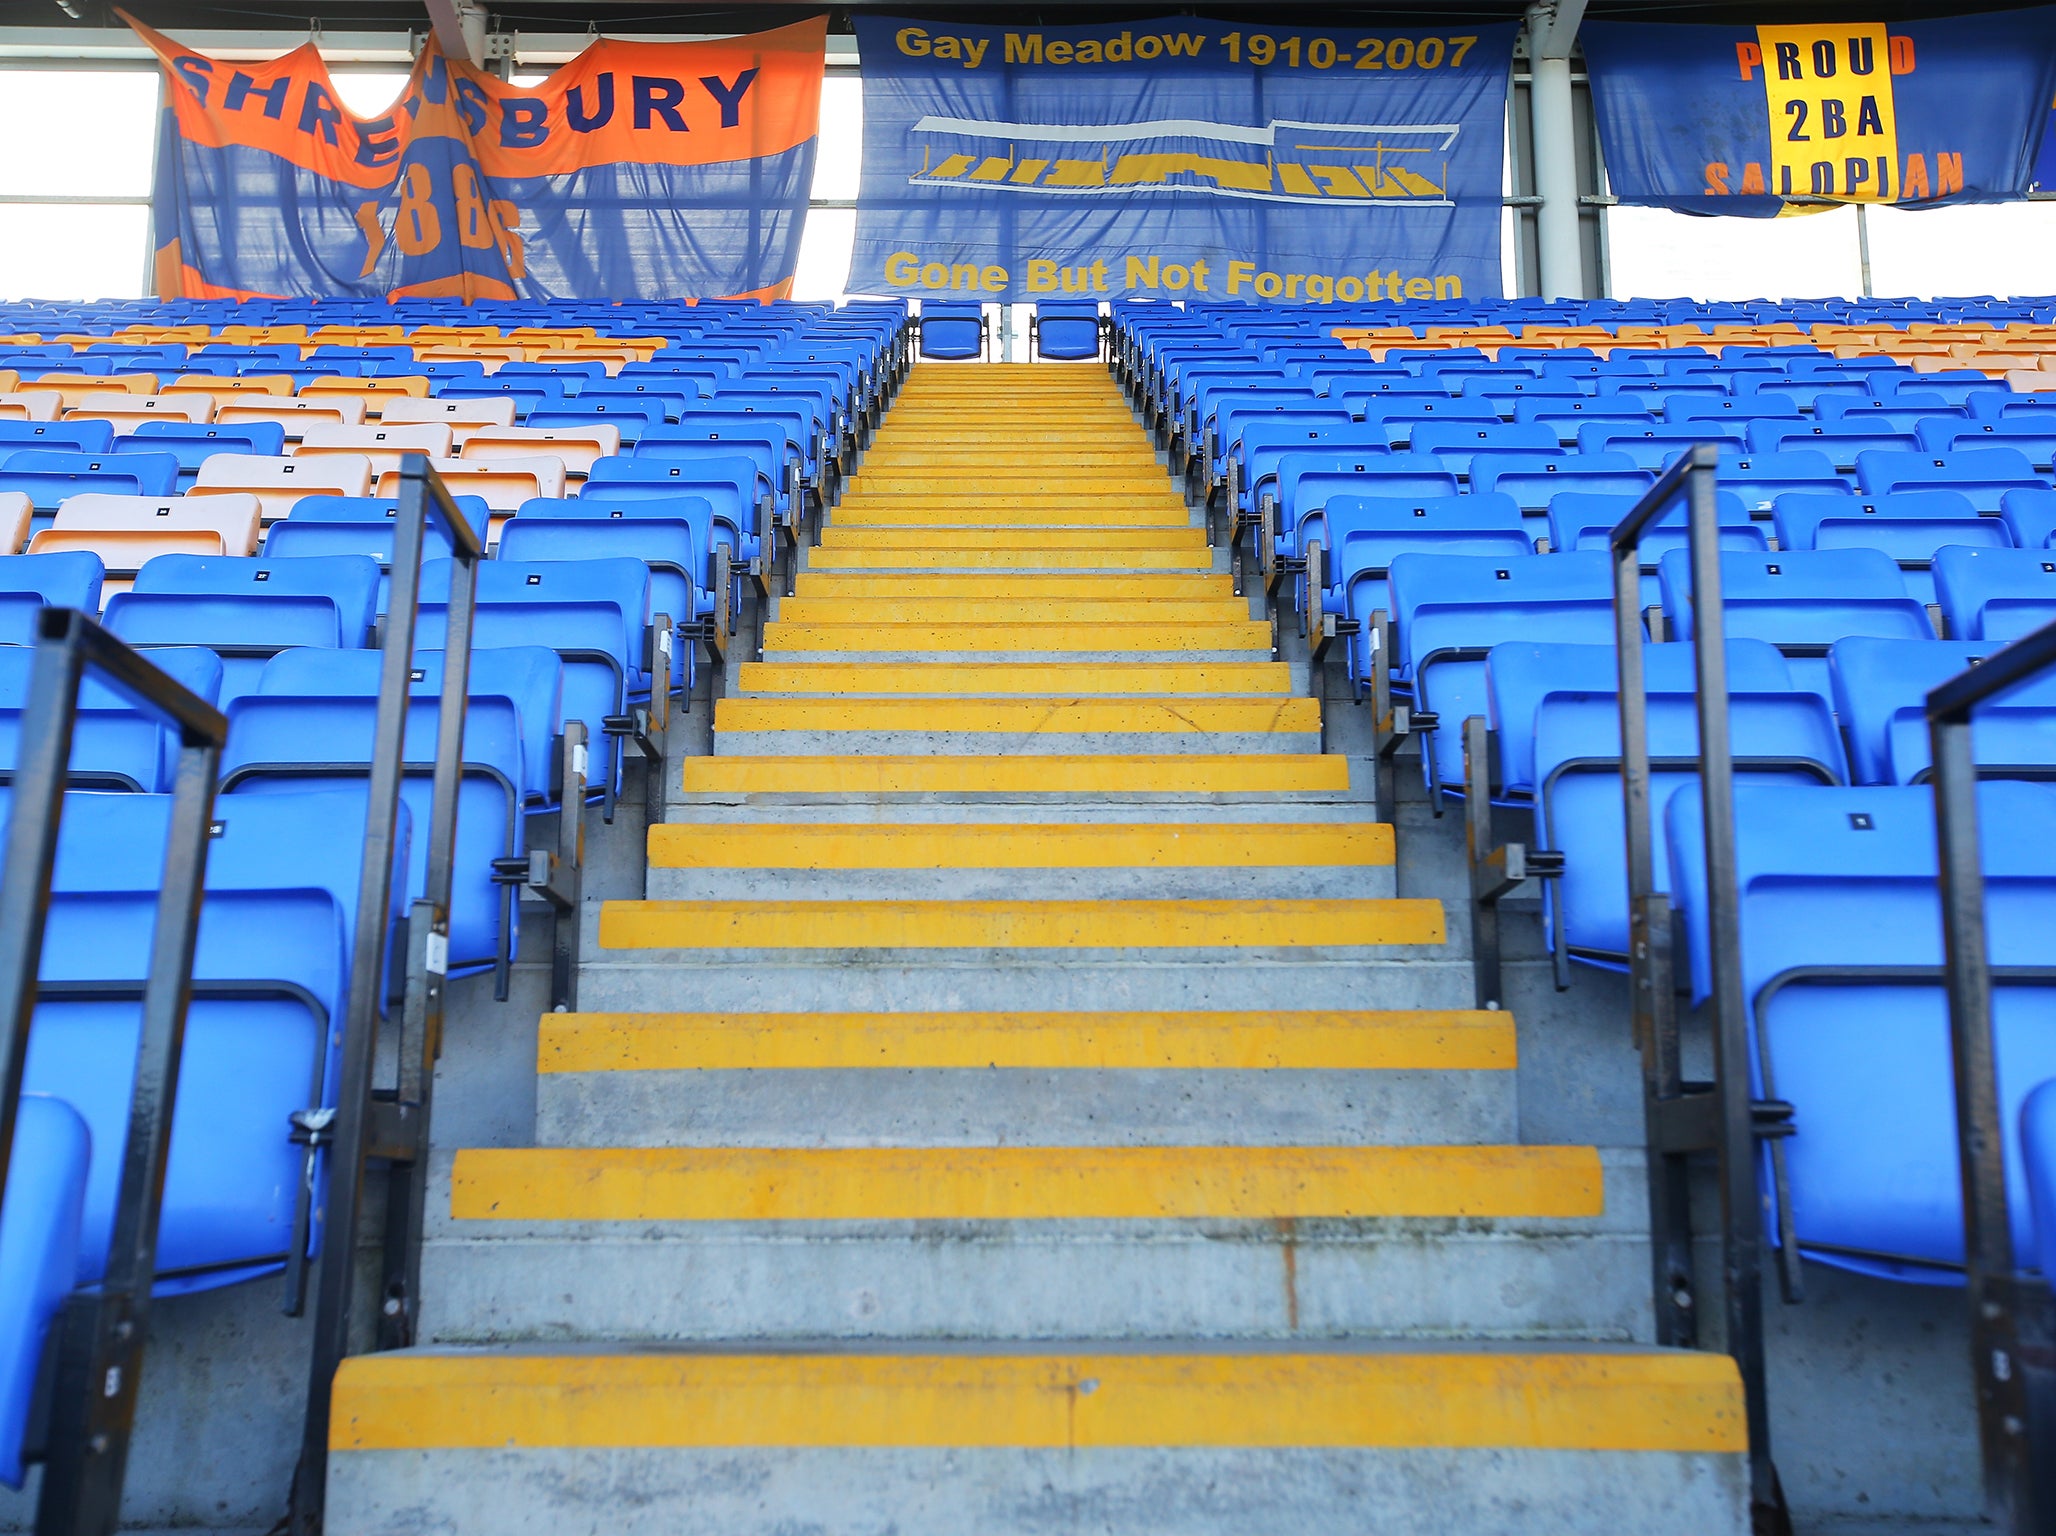 Shrewsbury Town have introduced safe standing at their New Meadow home